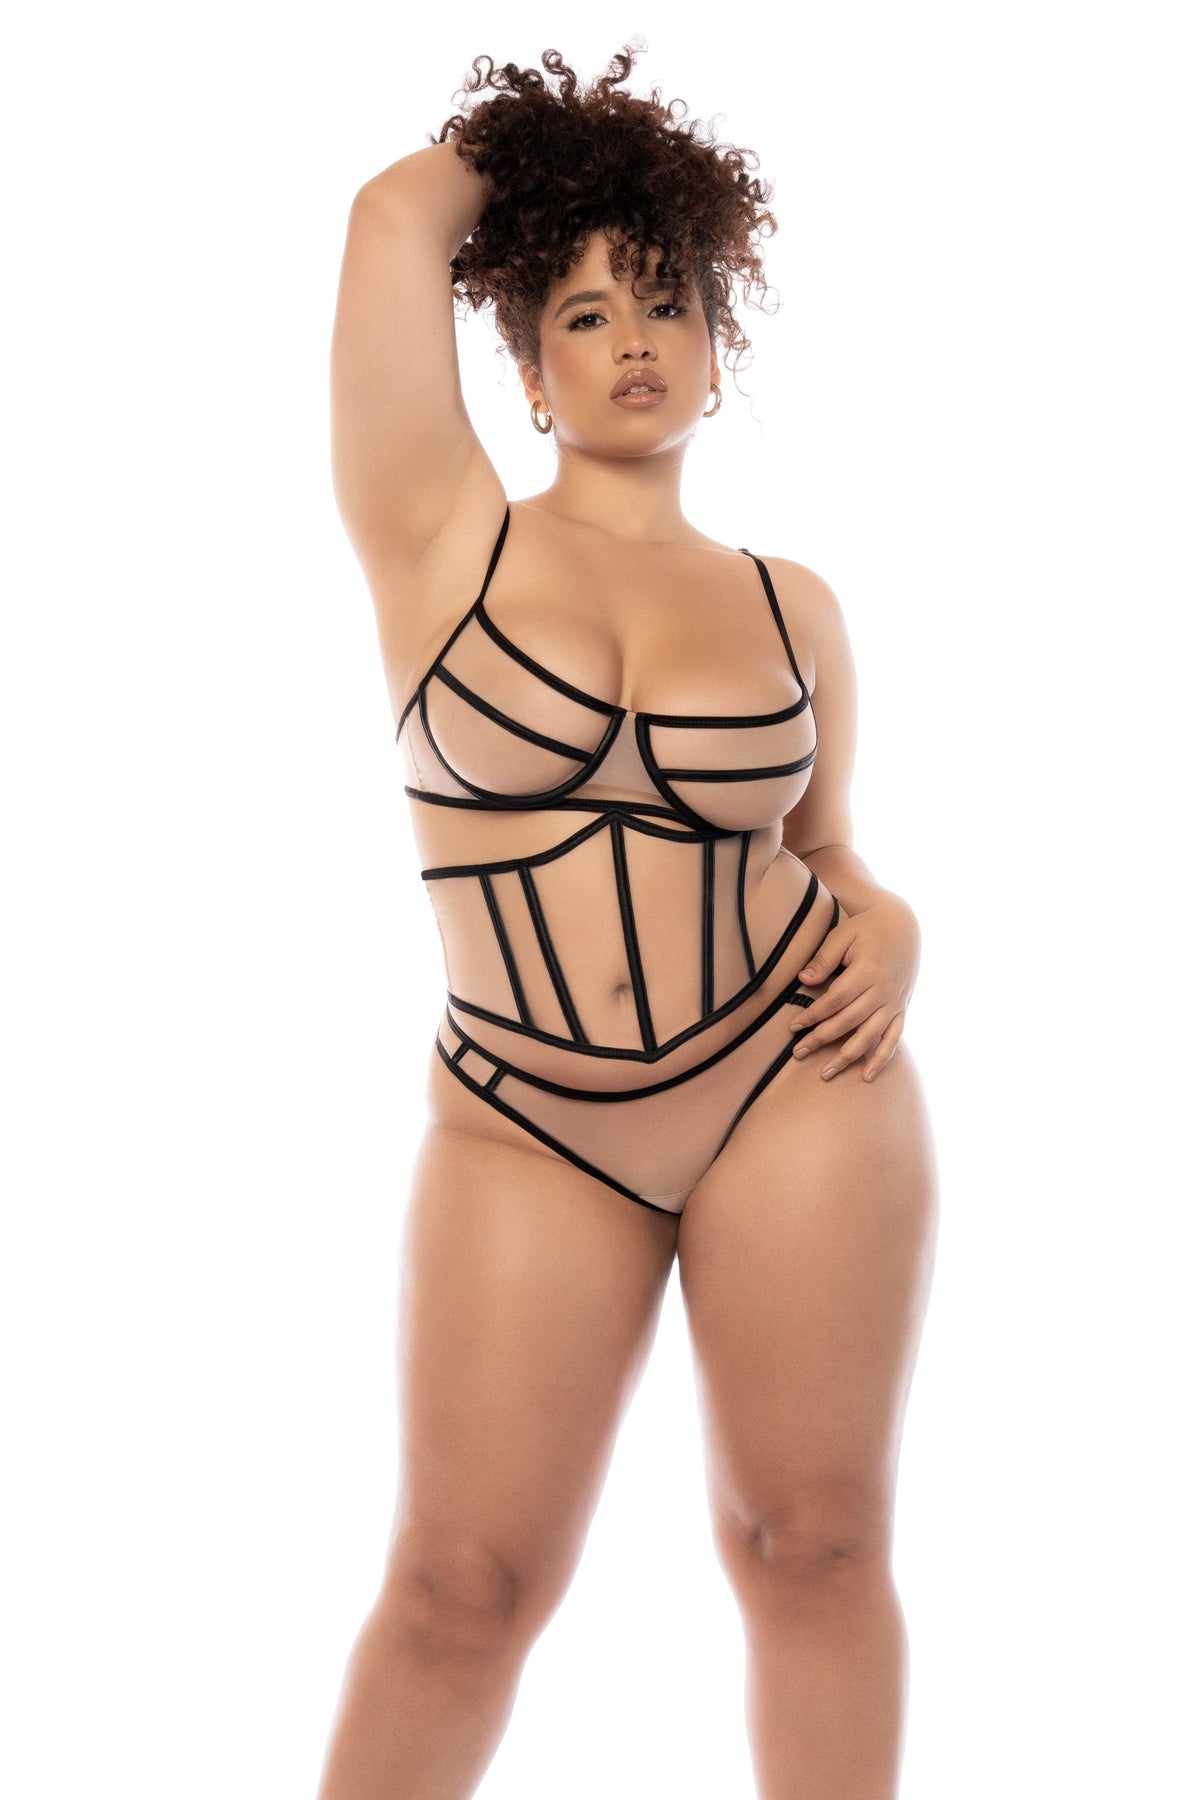 mapale Plus Size Sexy Nude Sheer Mesh Underwire Top, Corset, &amp; Thong 3 Pc. Lingerie Set 2024 Sexy Nude Sheer Mesh Underwire Corset Thong Lingerie Apparel &amp; Accessories &gt; Clothing &gt; Underwear &amp; Socks &gt; Lingerie